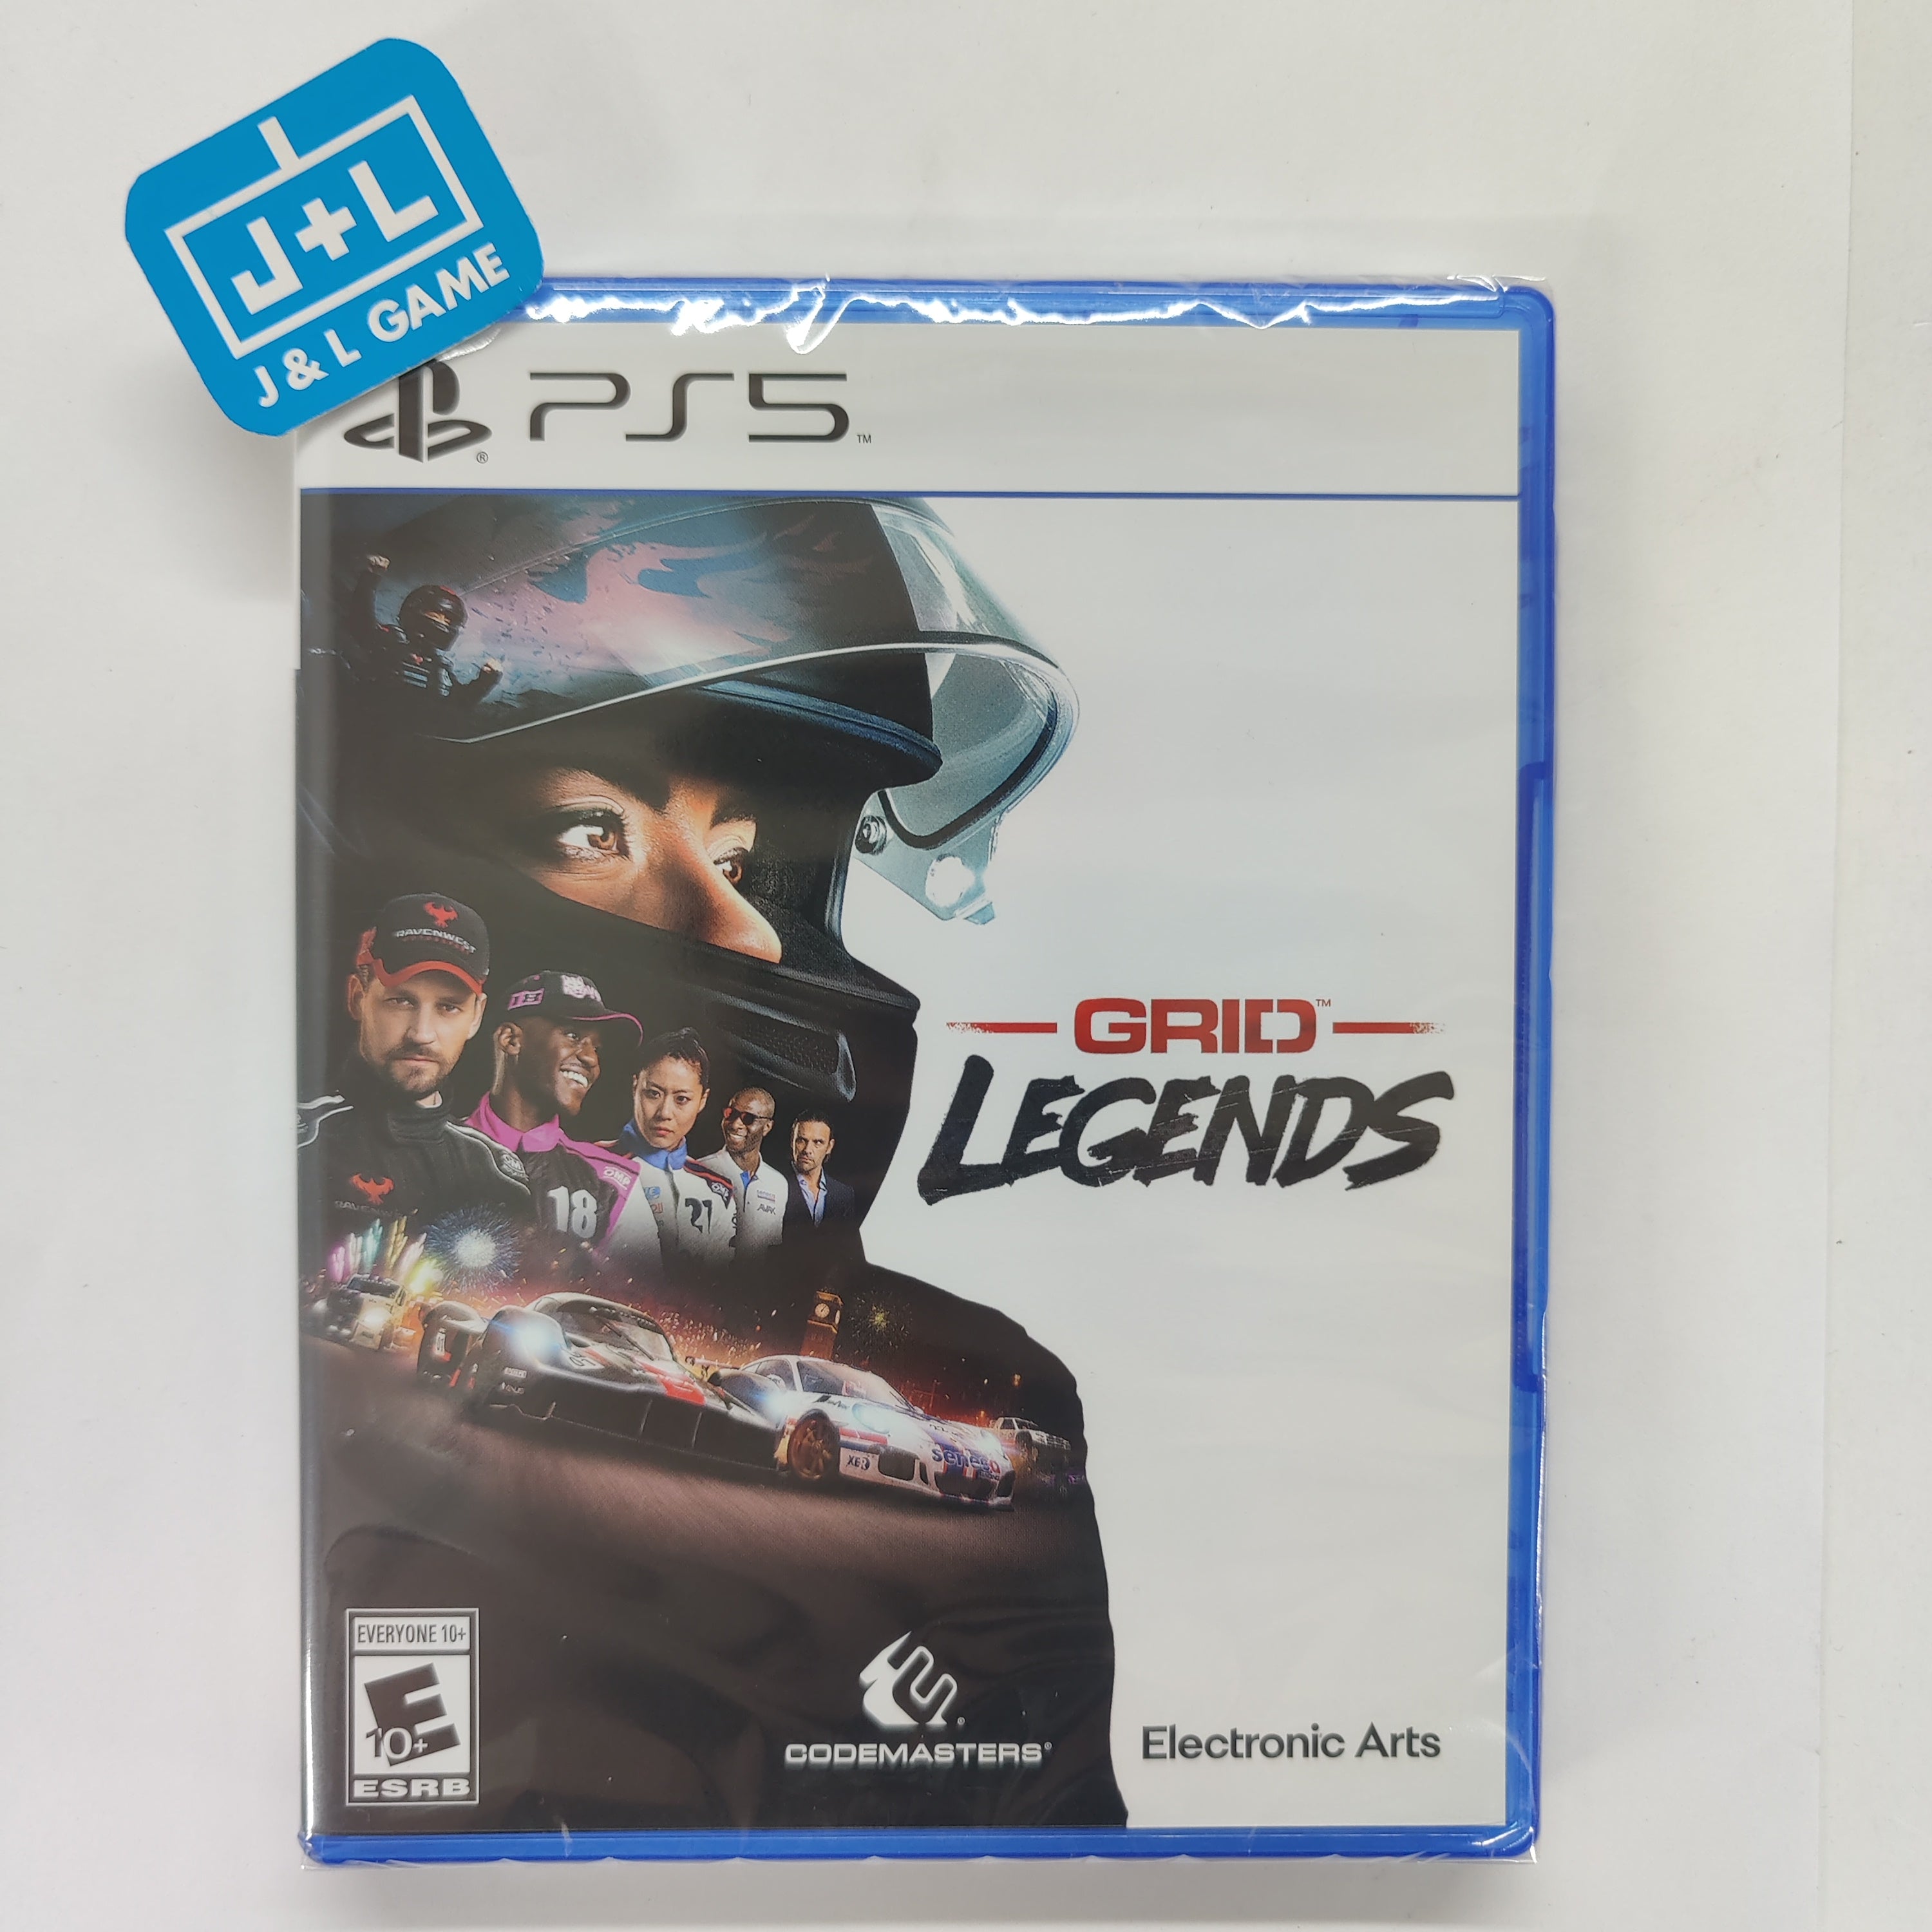 GRID Legends - (PS5) PlayStation 5 Video Games Electronic Arts   